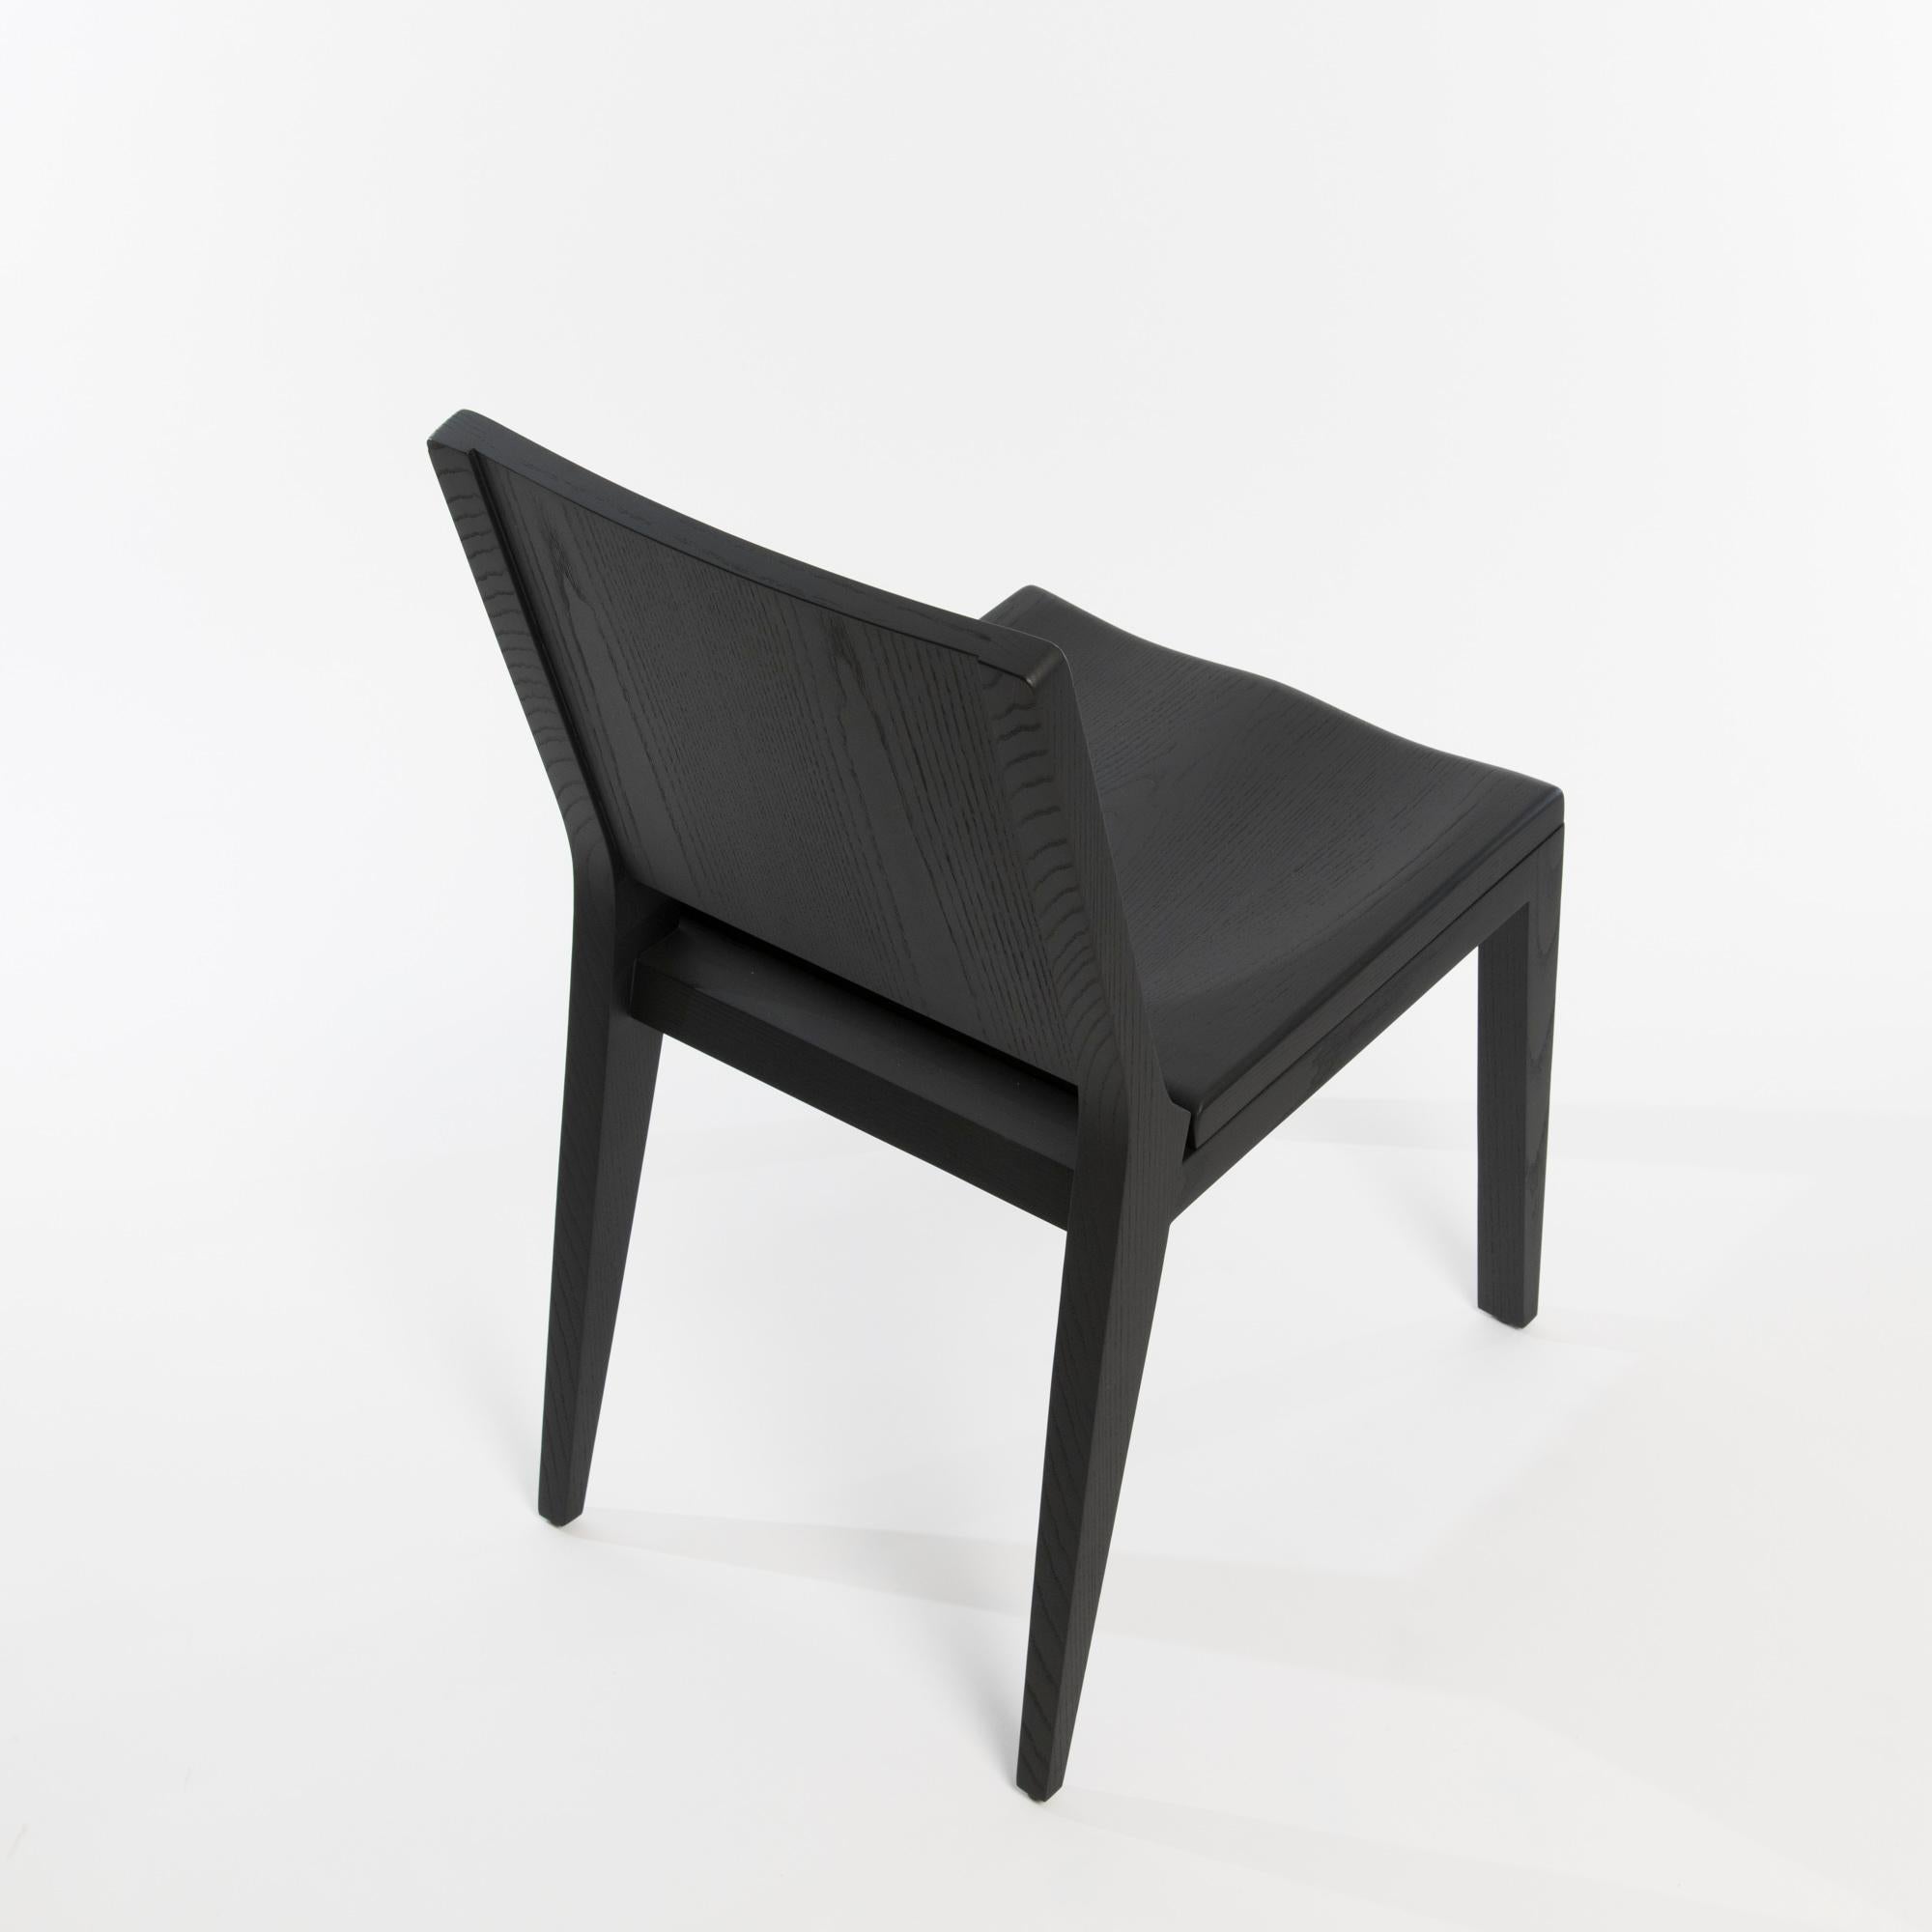 Brushed Black Ash Minimal Chair - om5.0 by mjiila For Sale